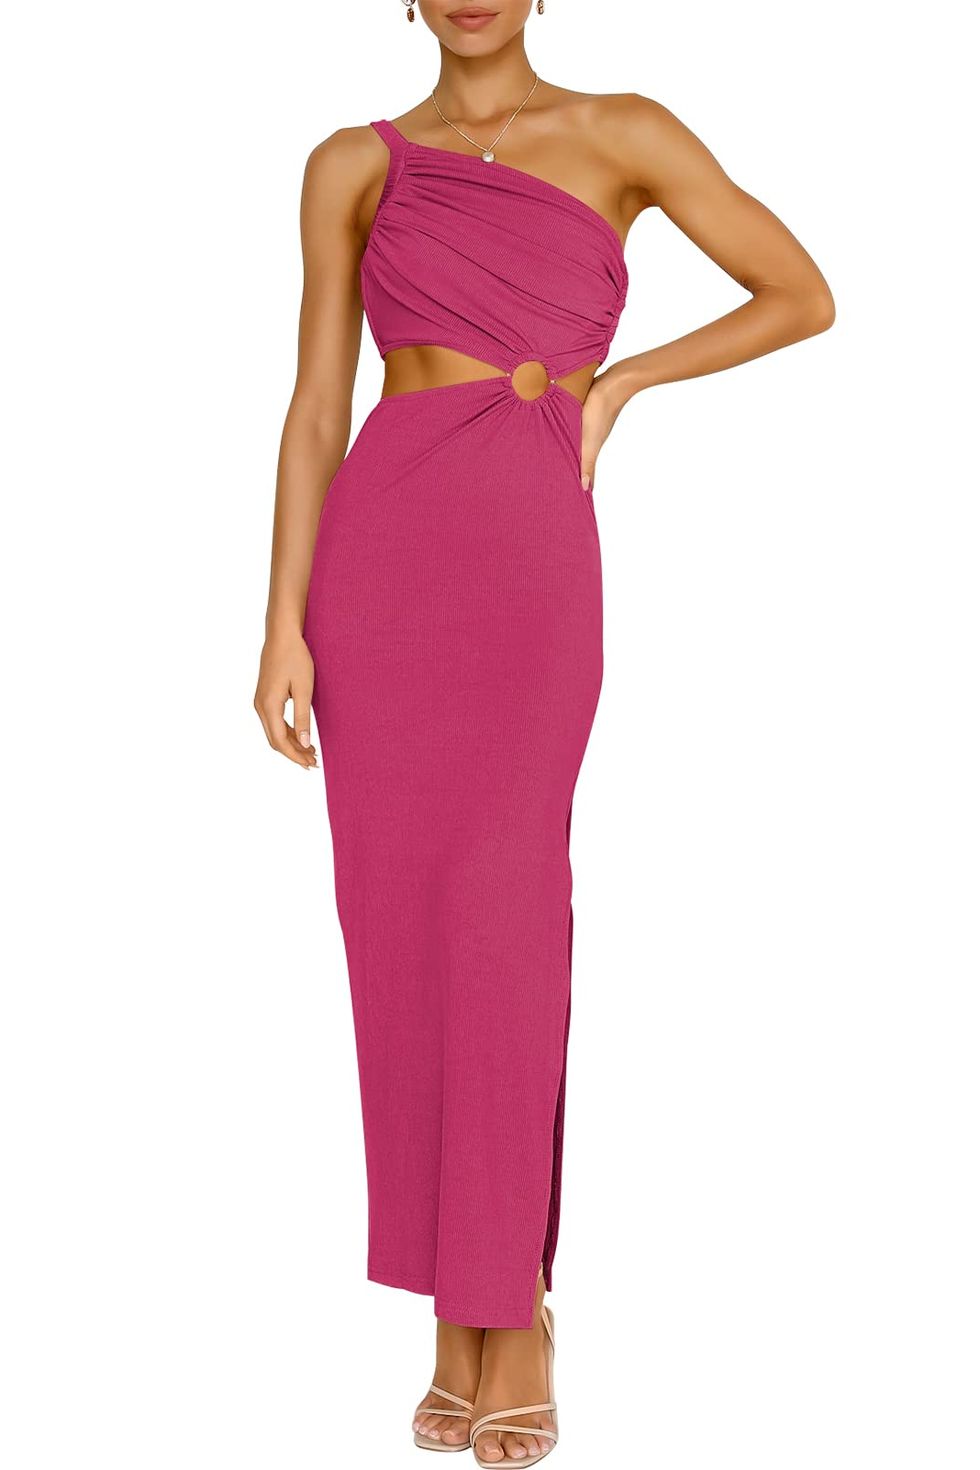 ANRABESS Cut Out Backless Dress